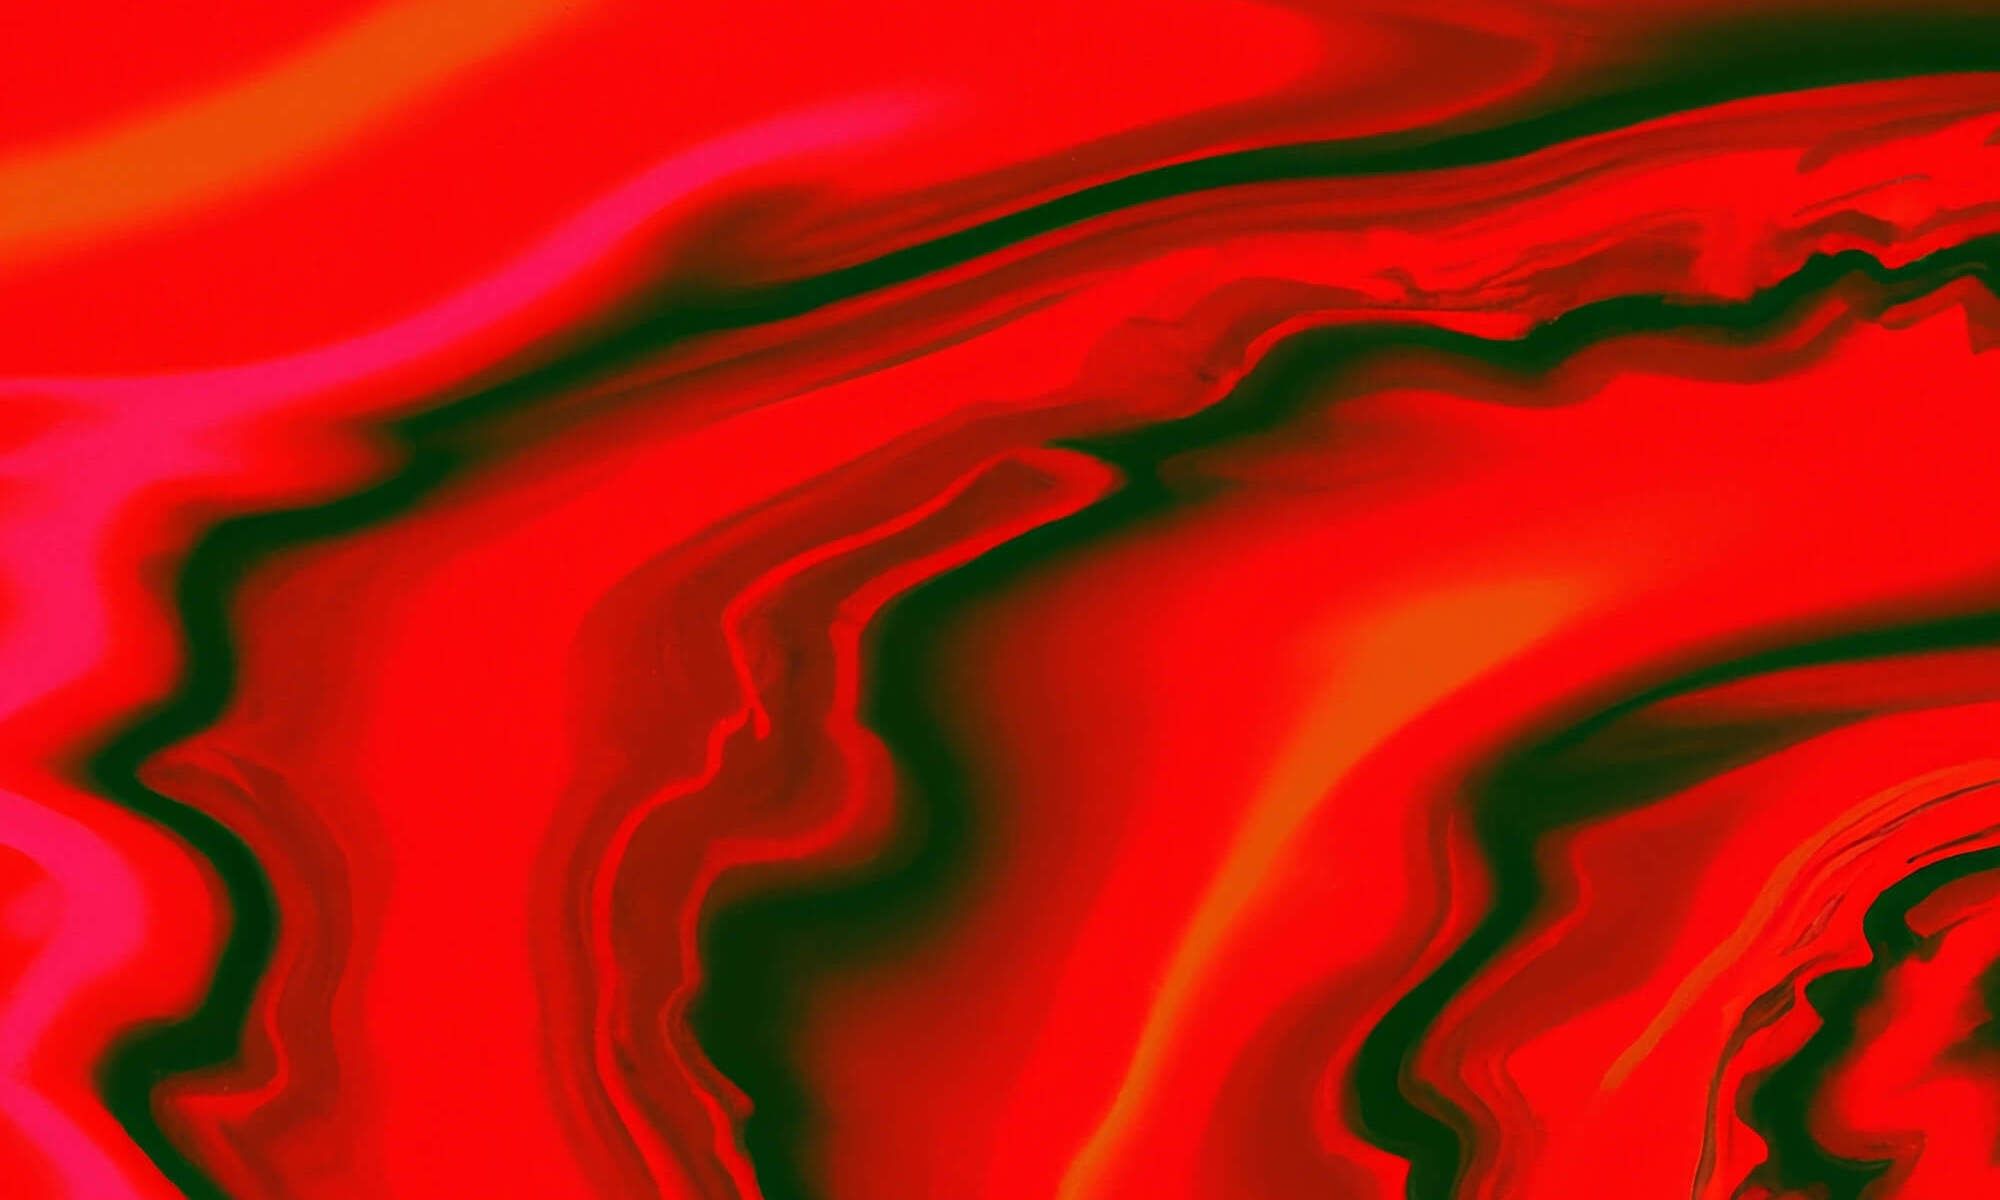 Generated by DALL-E with the prompt dynamic red eddy current